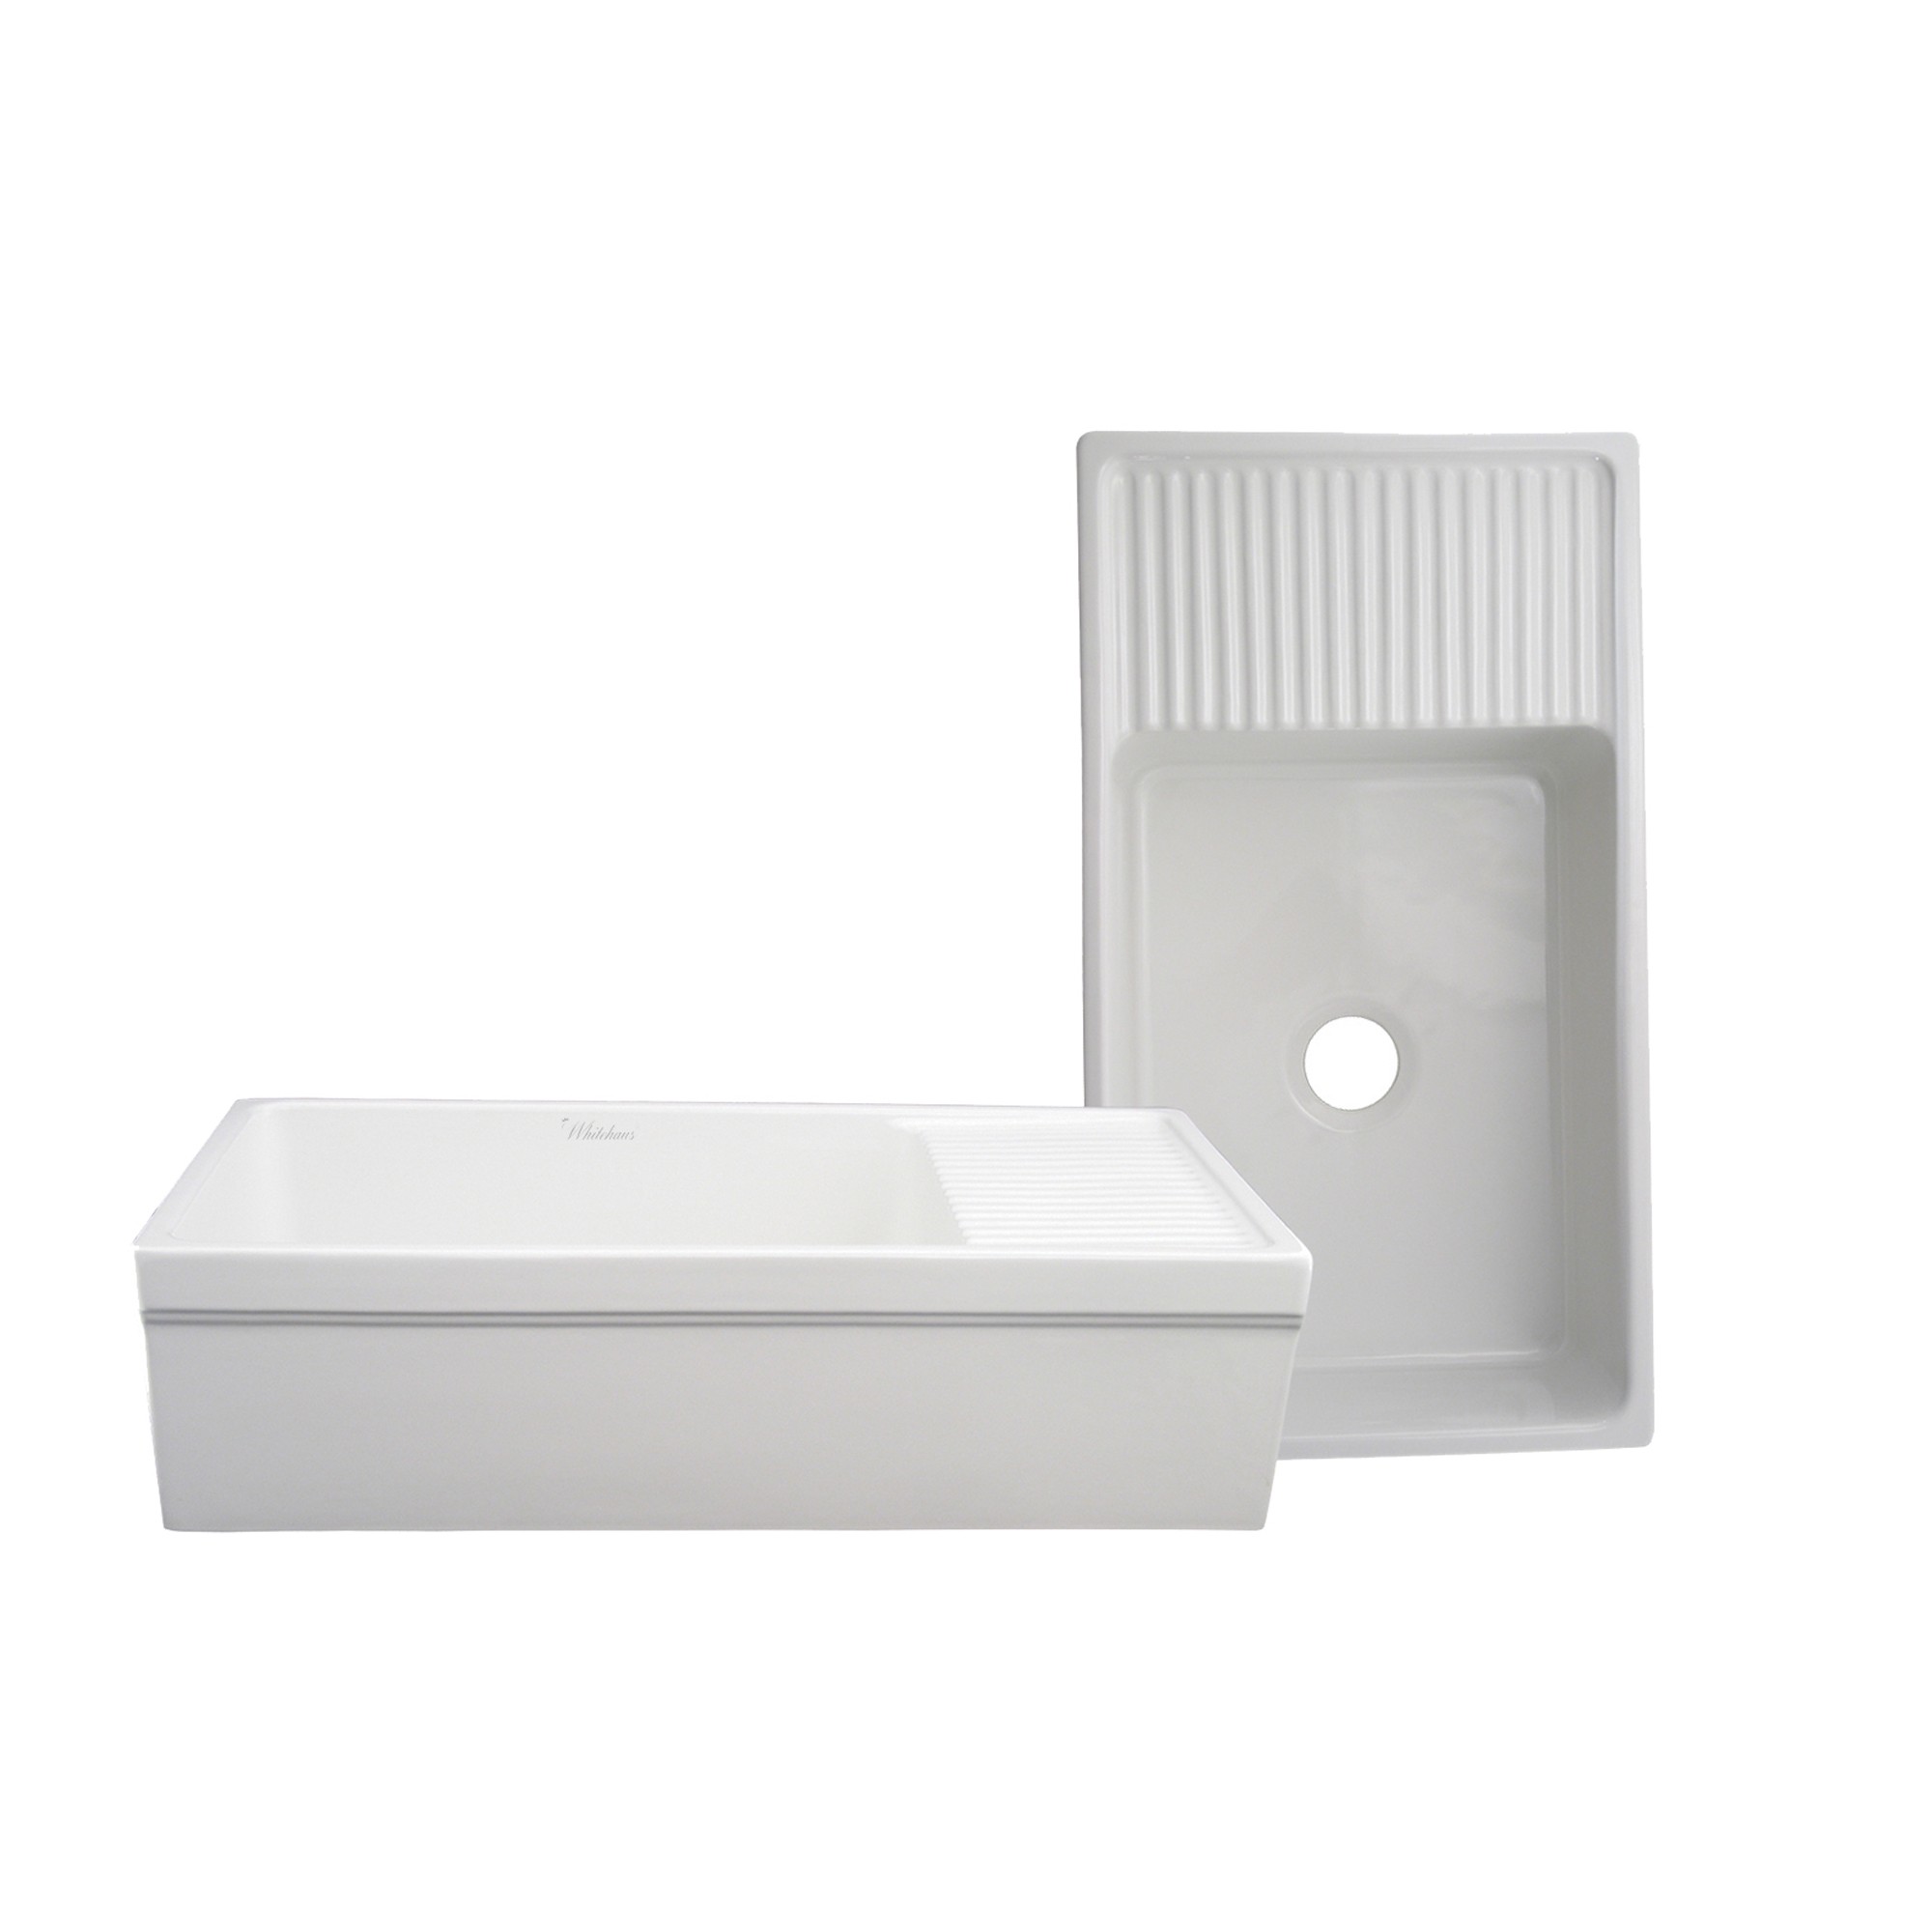 Farmhaus Fireclay Quatro Alcove Large Reversible Sink with Integral Drainboard and Decorative 2 +" Lip on Both Sides